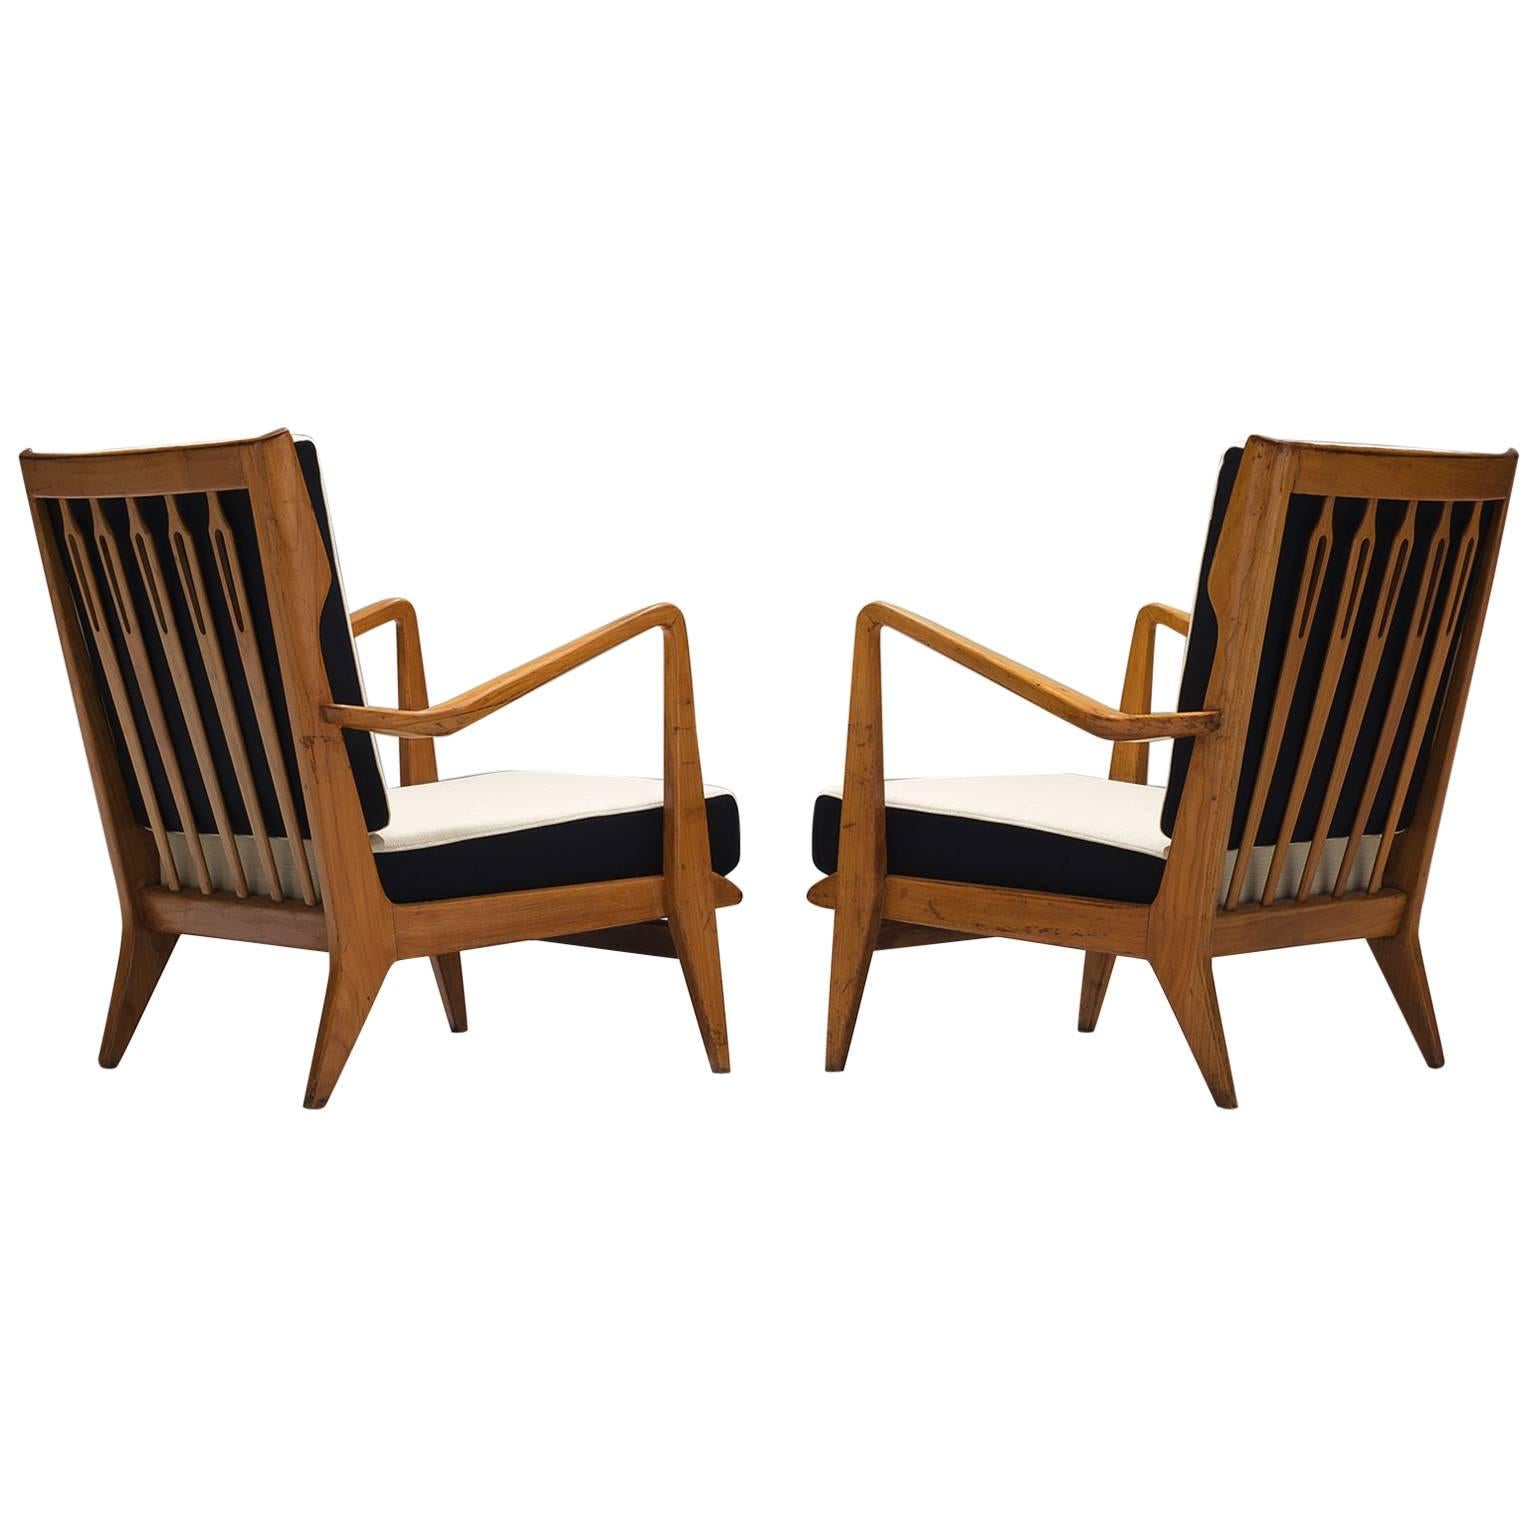 Gio Ponti for Cassina Pair of 'Model 516' Lounge Chairs in Walnut